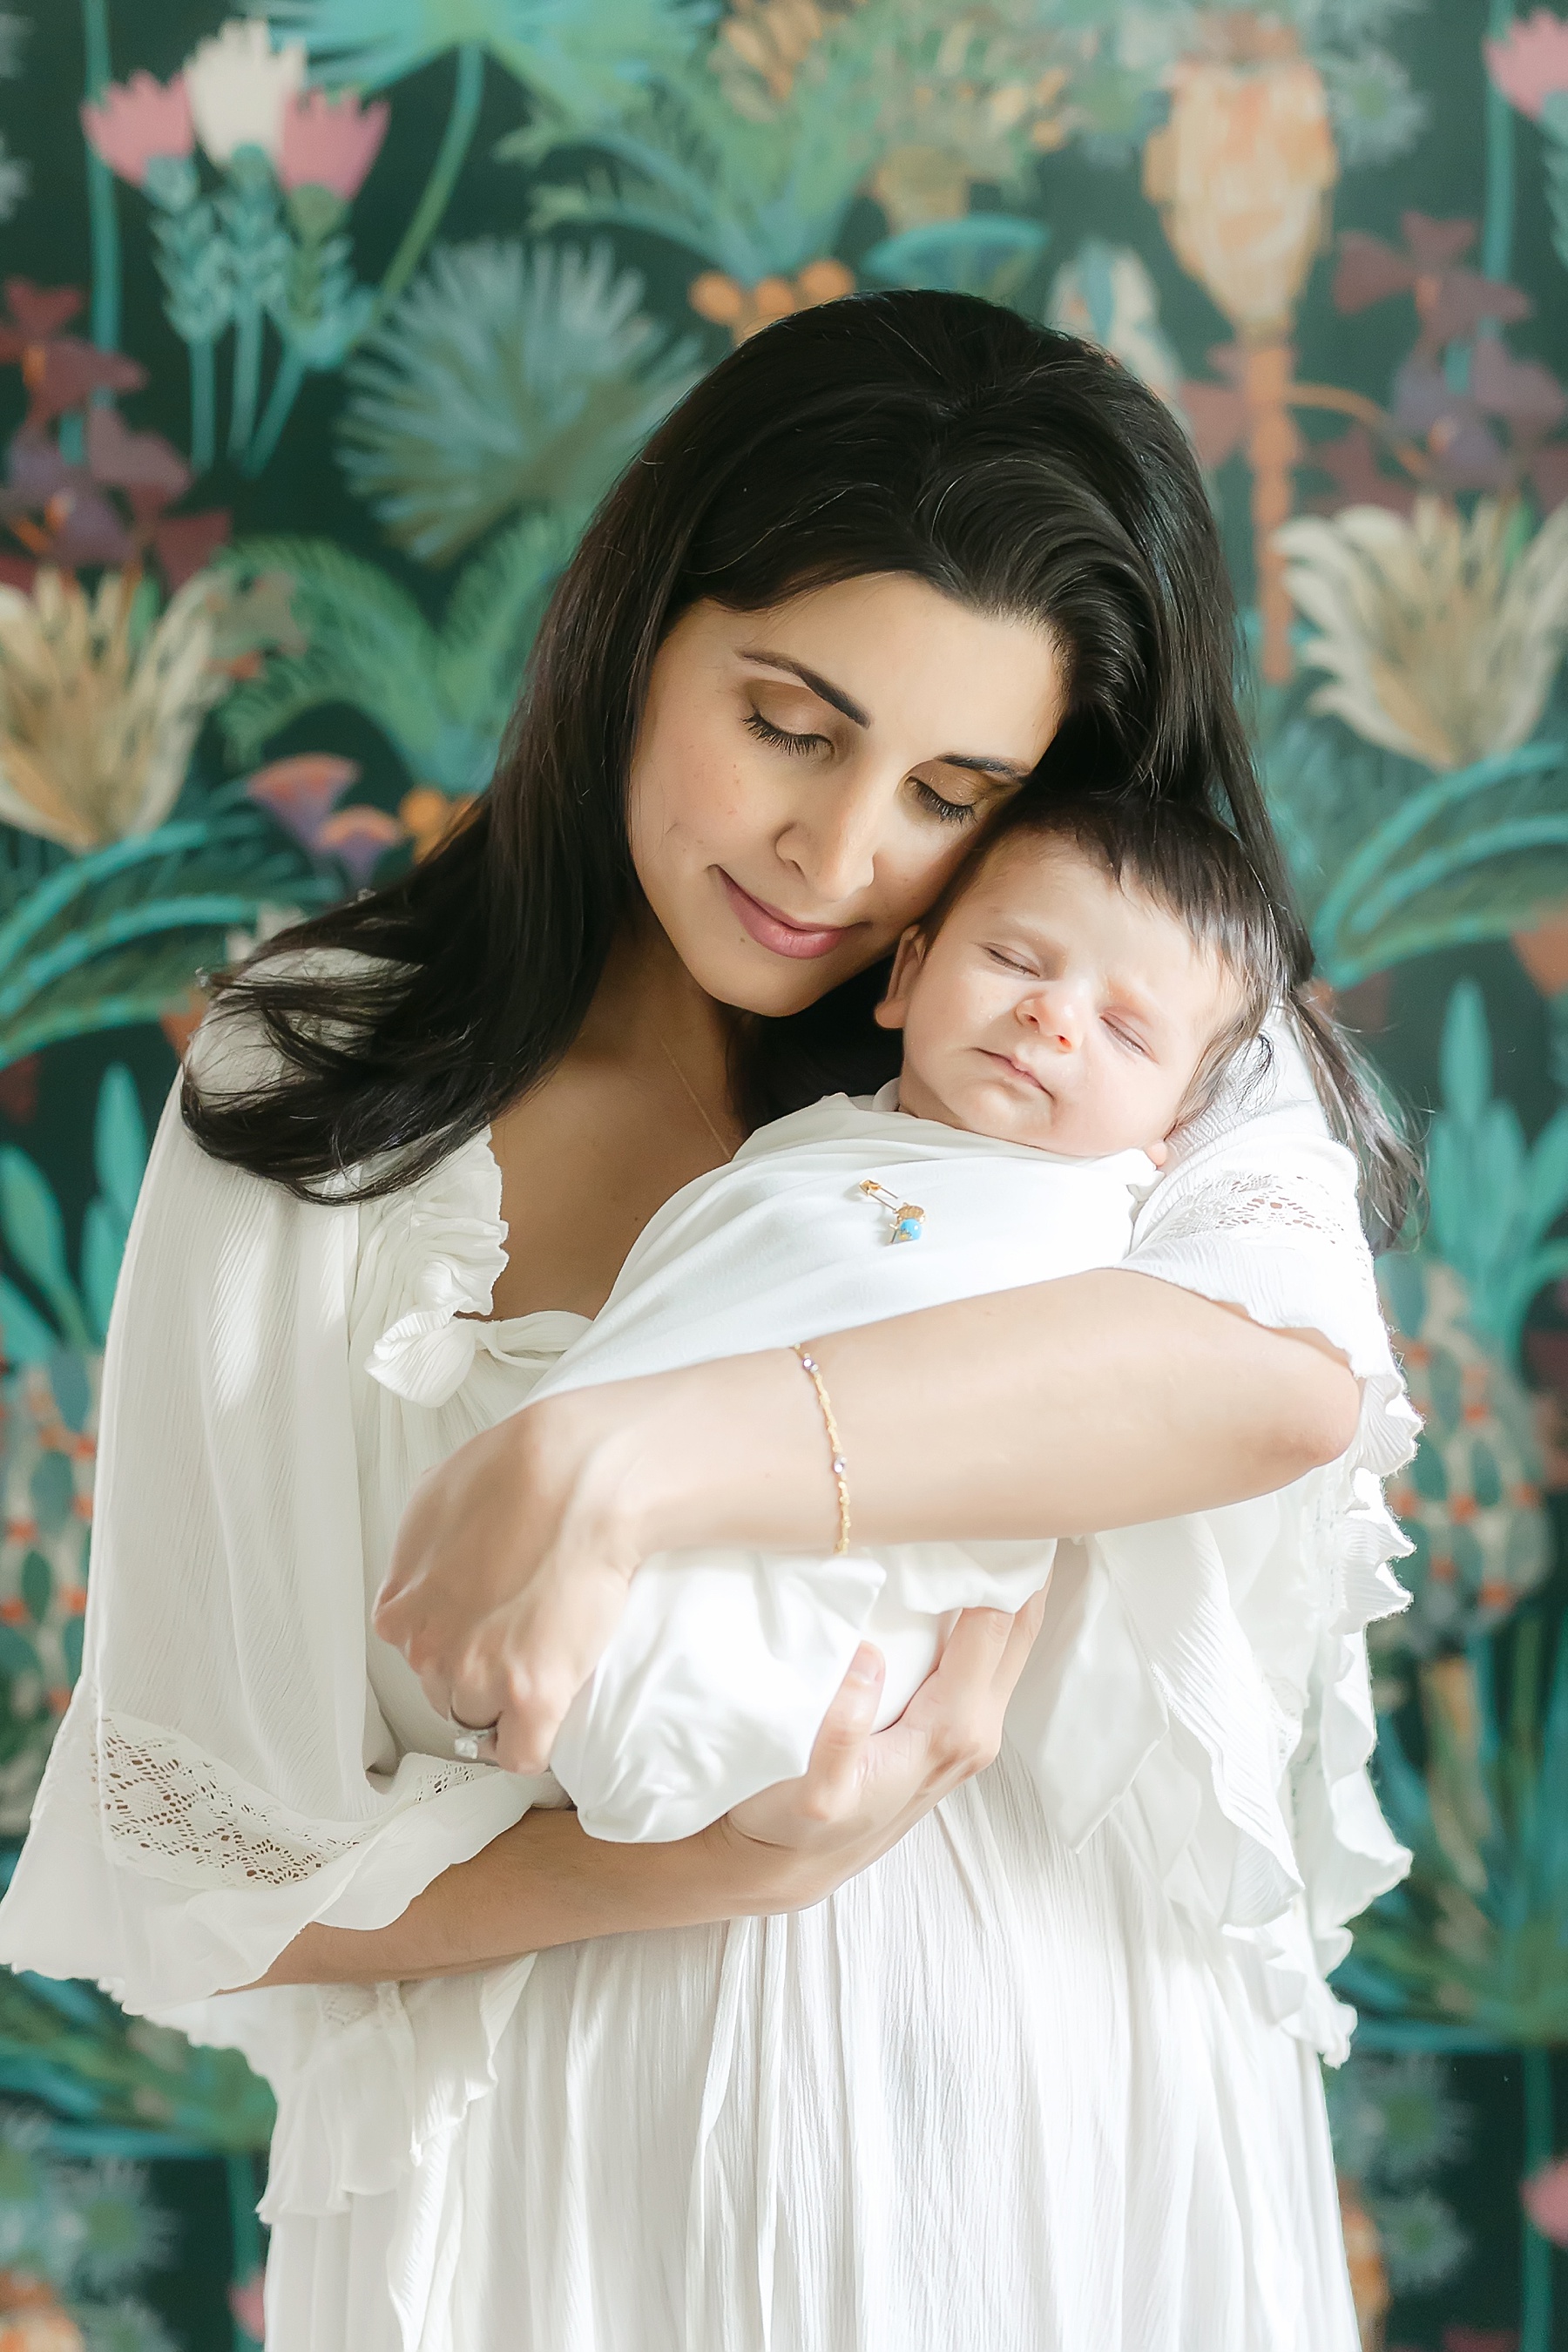 dark haired woman holding newborn baby boy wrapped in white swaddle against boho floral wallpaper